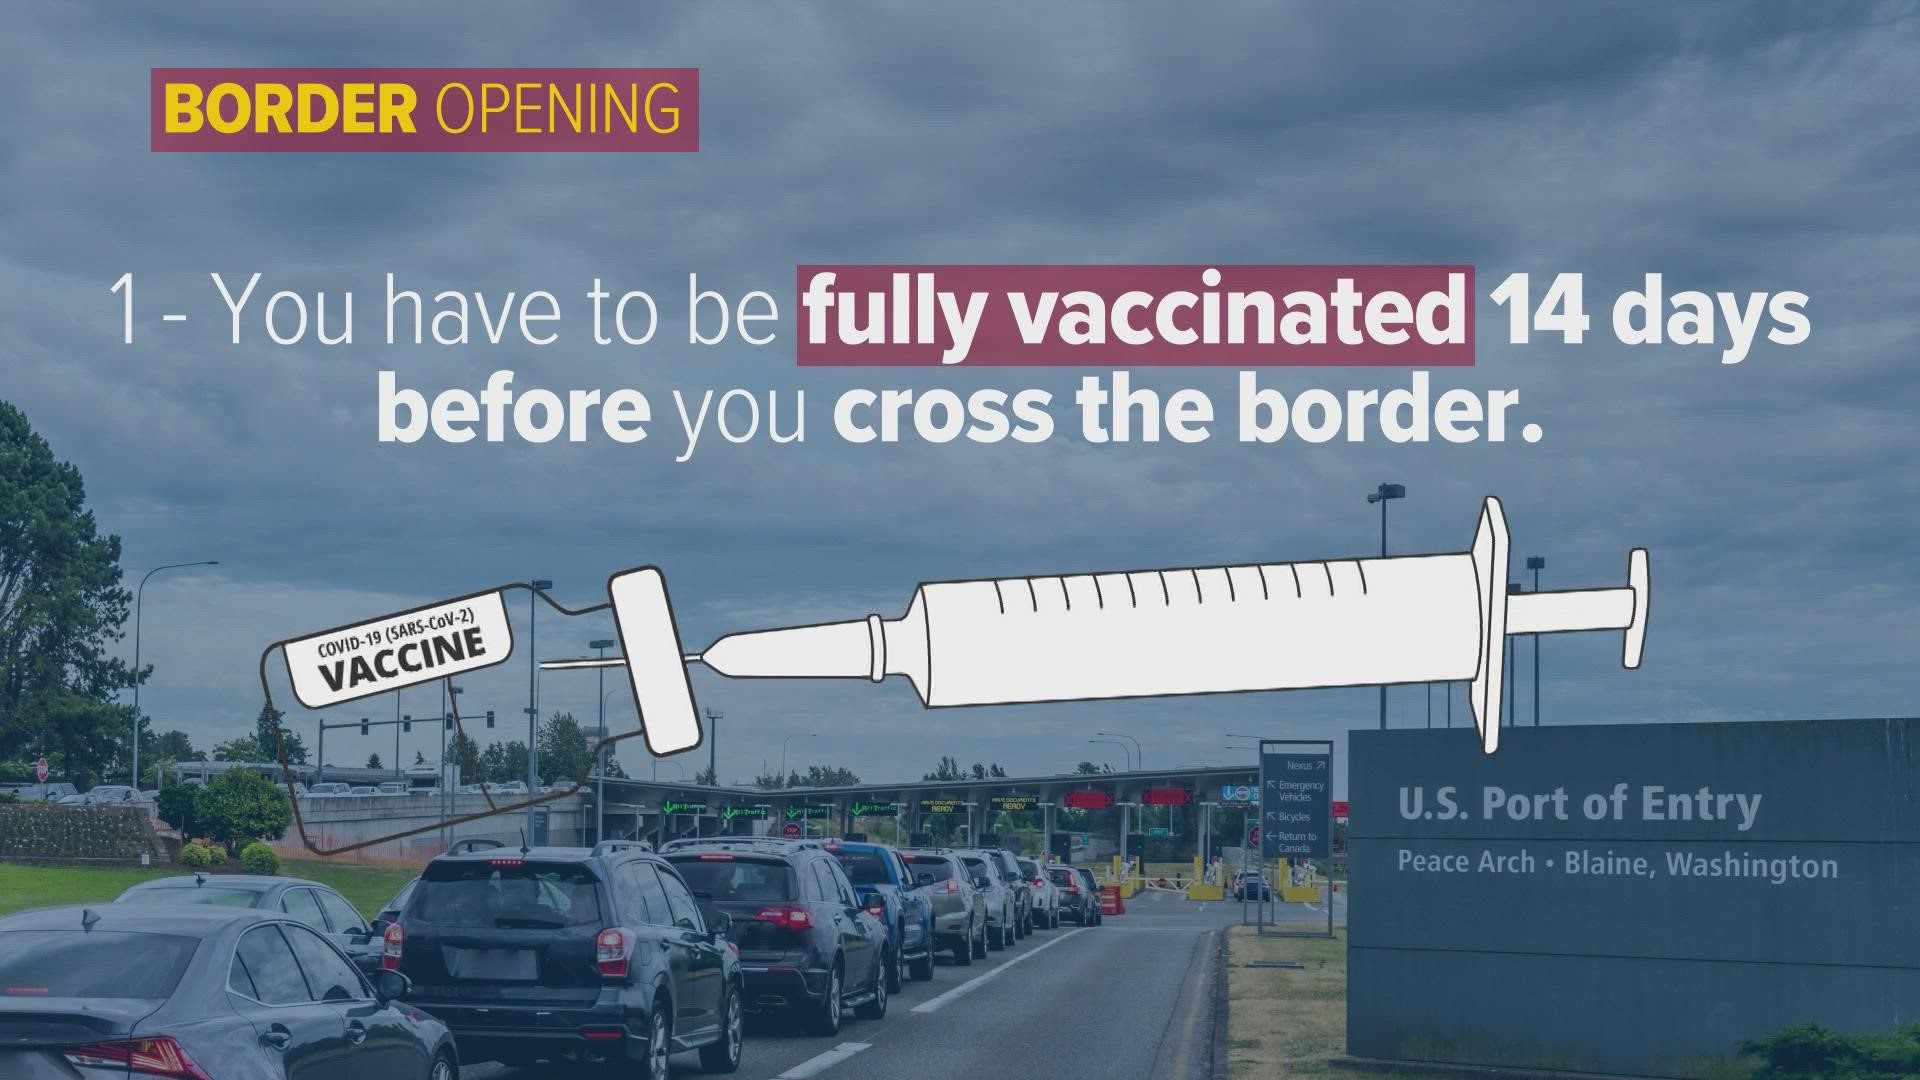 Canada will allow fully vaccinated Americans across its border starting Aug. 9, but there are several steps people need to take before traveling.